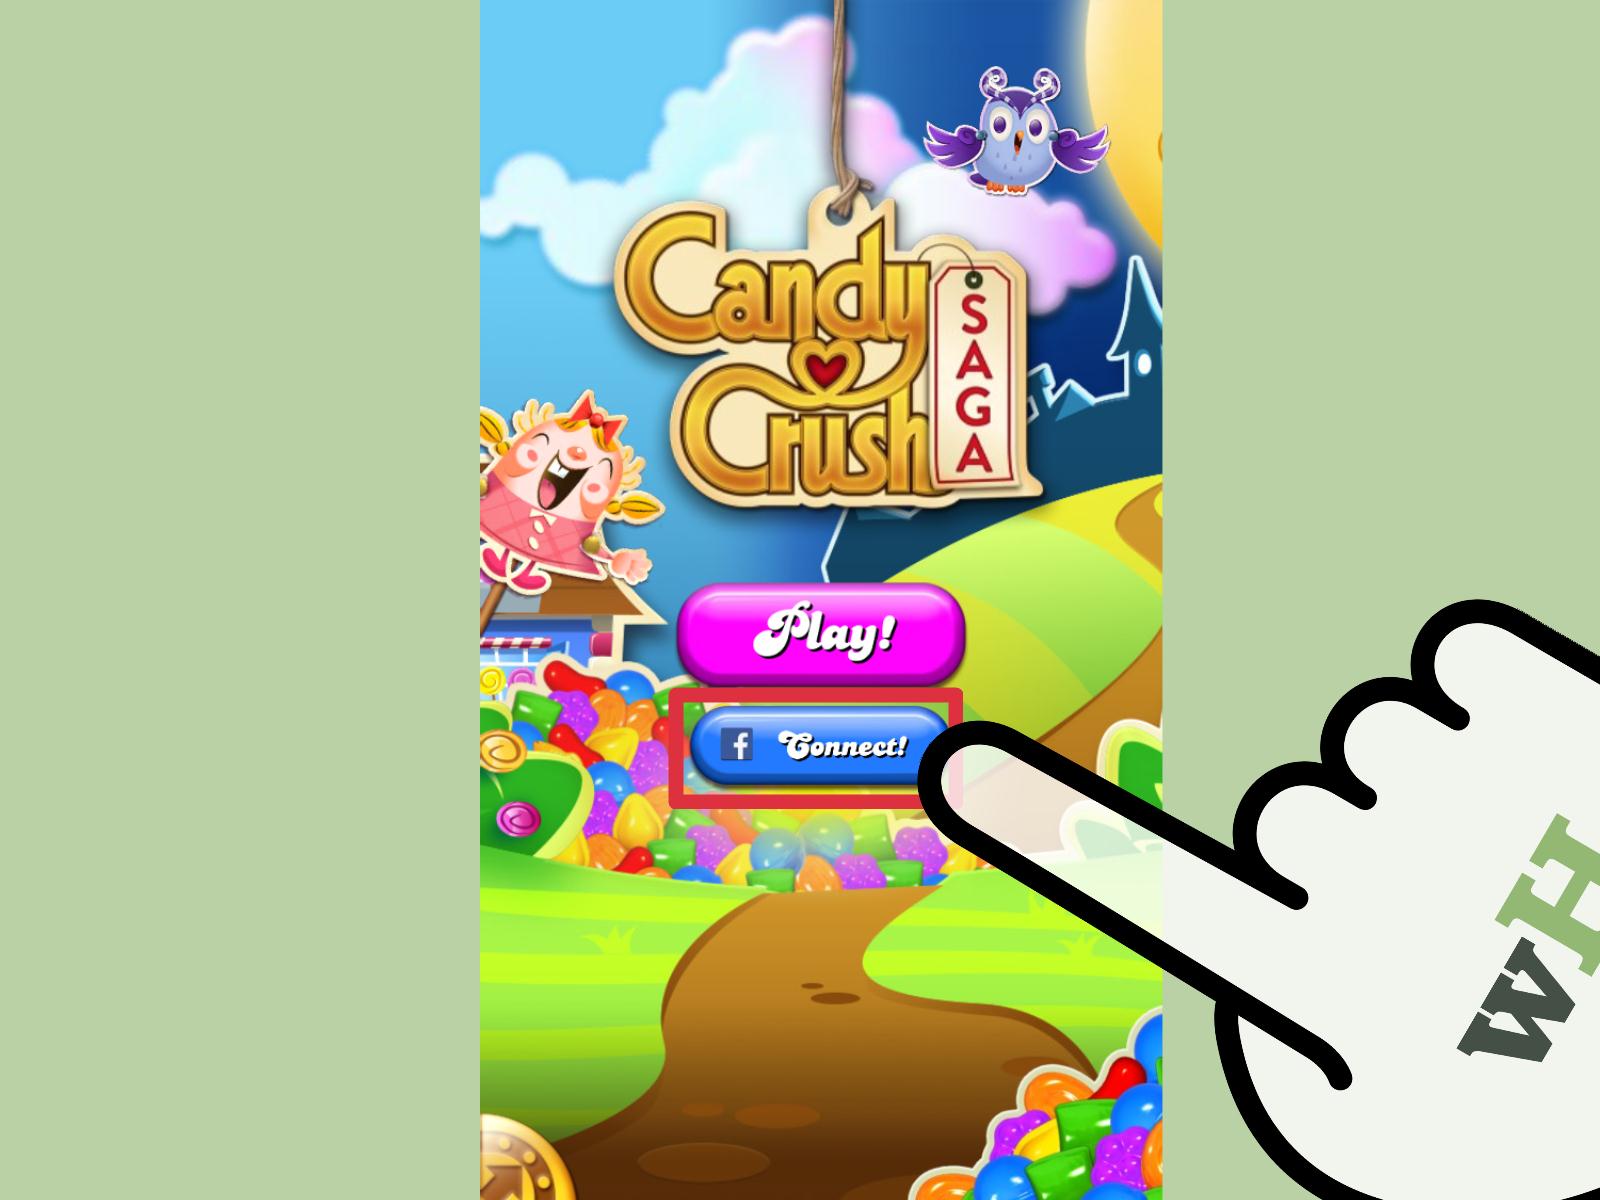 Image Titled Reconnect Candy Crush To Facebook Step - Android Forgot Password Facebook - HD Wallpaper 